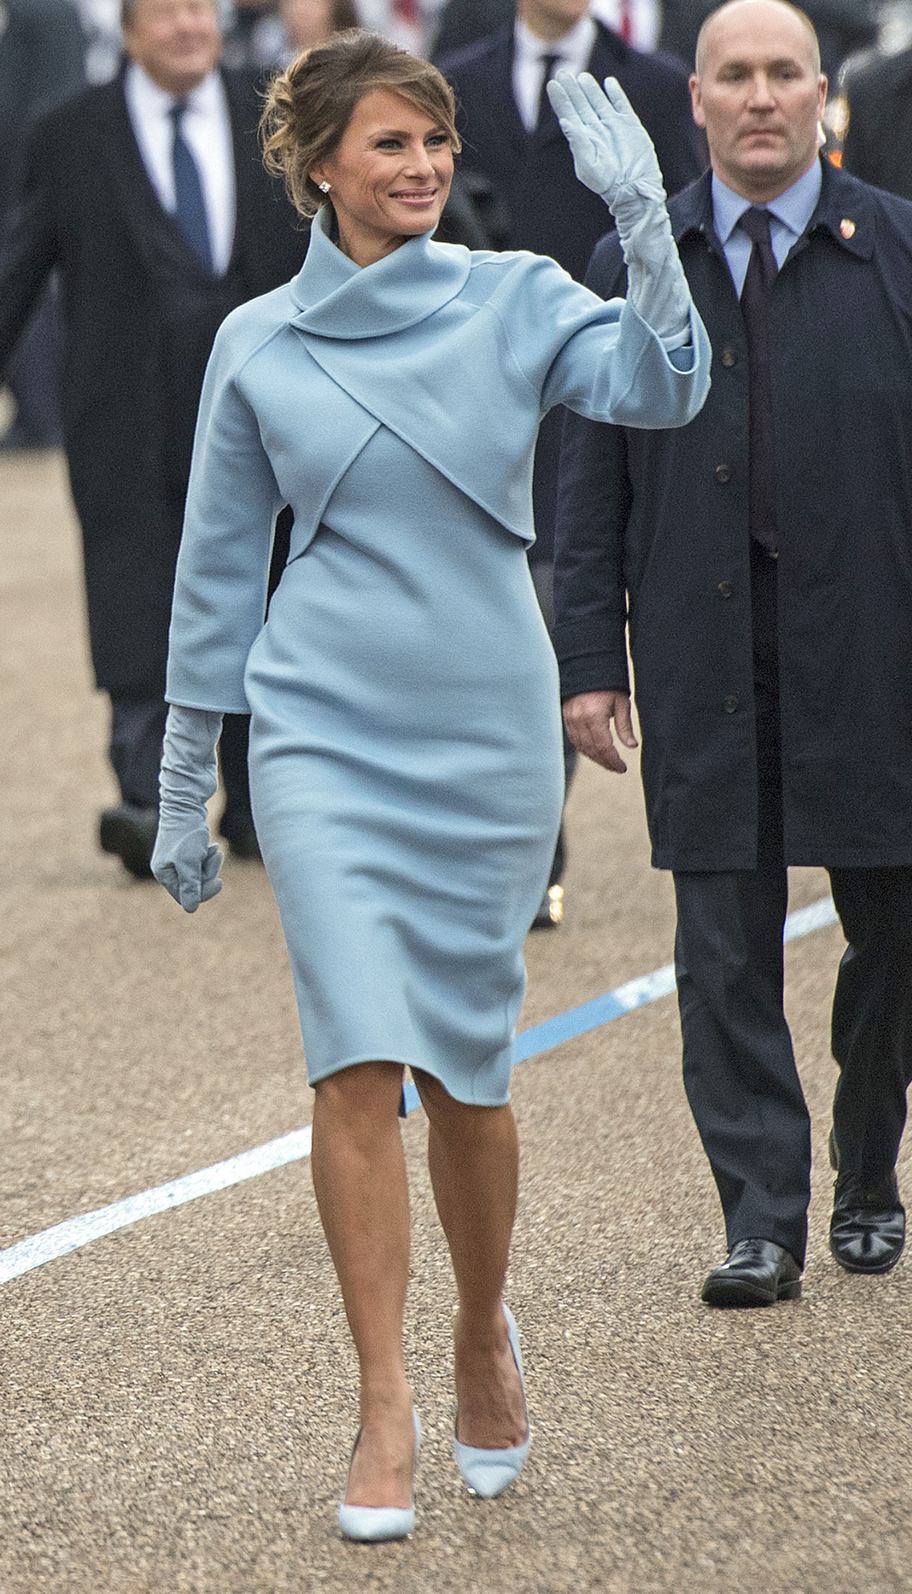 First Lady Melania Trump walk in the inaugural parade after President Trump was sworn-in as the 45th President in Washington, D.C. on January 20, 2017. Credit: Kevin Dietsch/UPI /CNP/MediaPunch Credit: MediaPunch/face to face